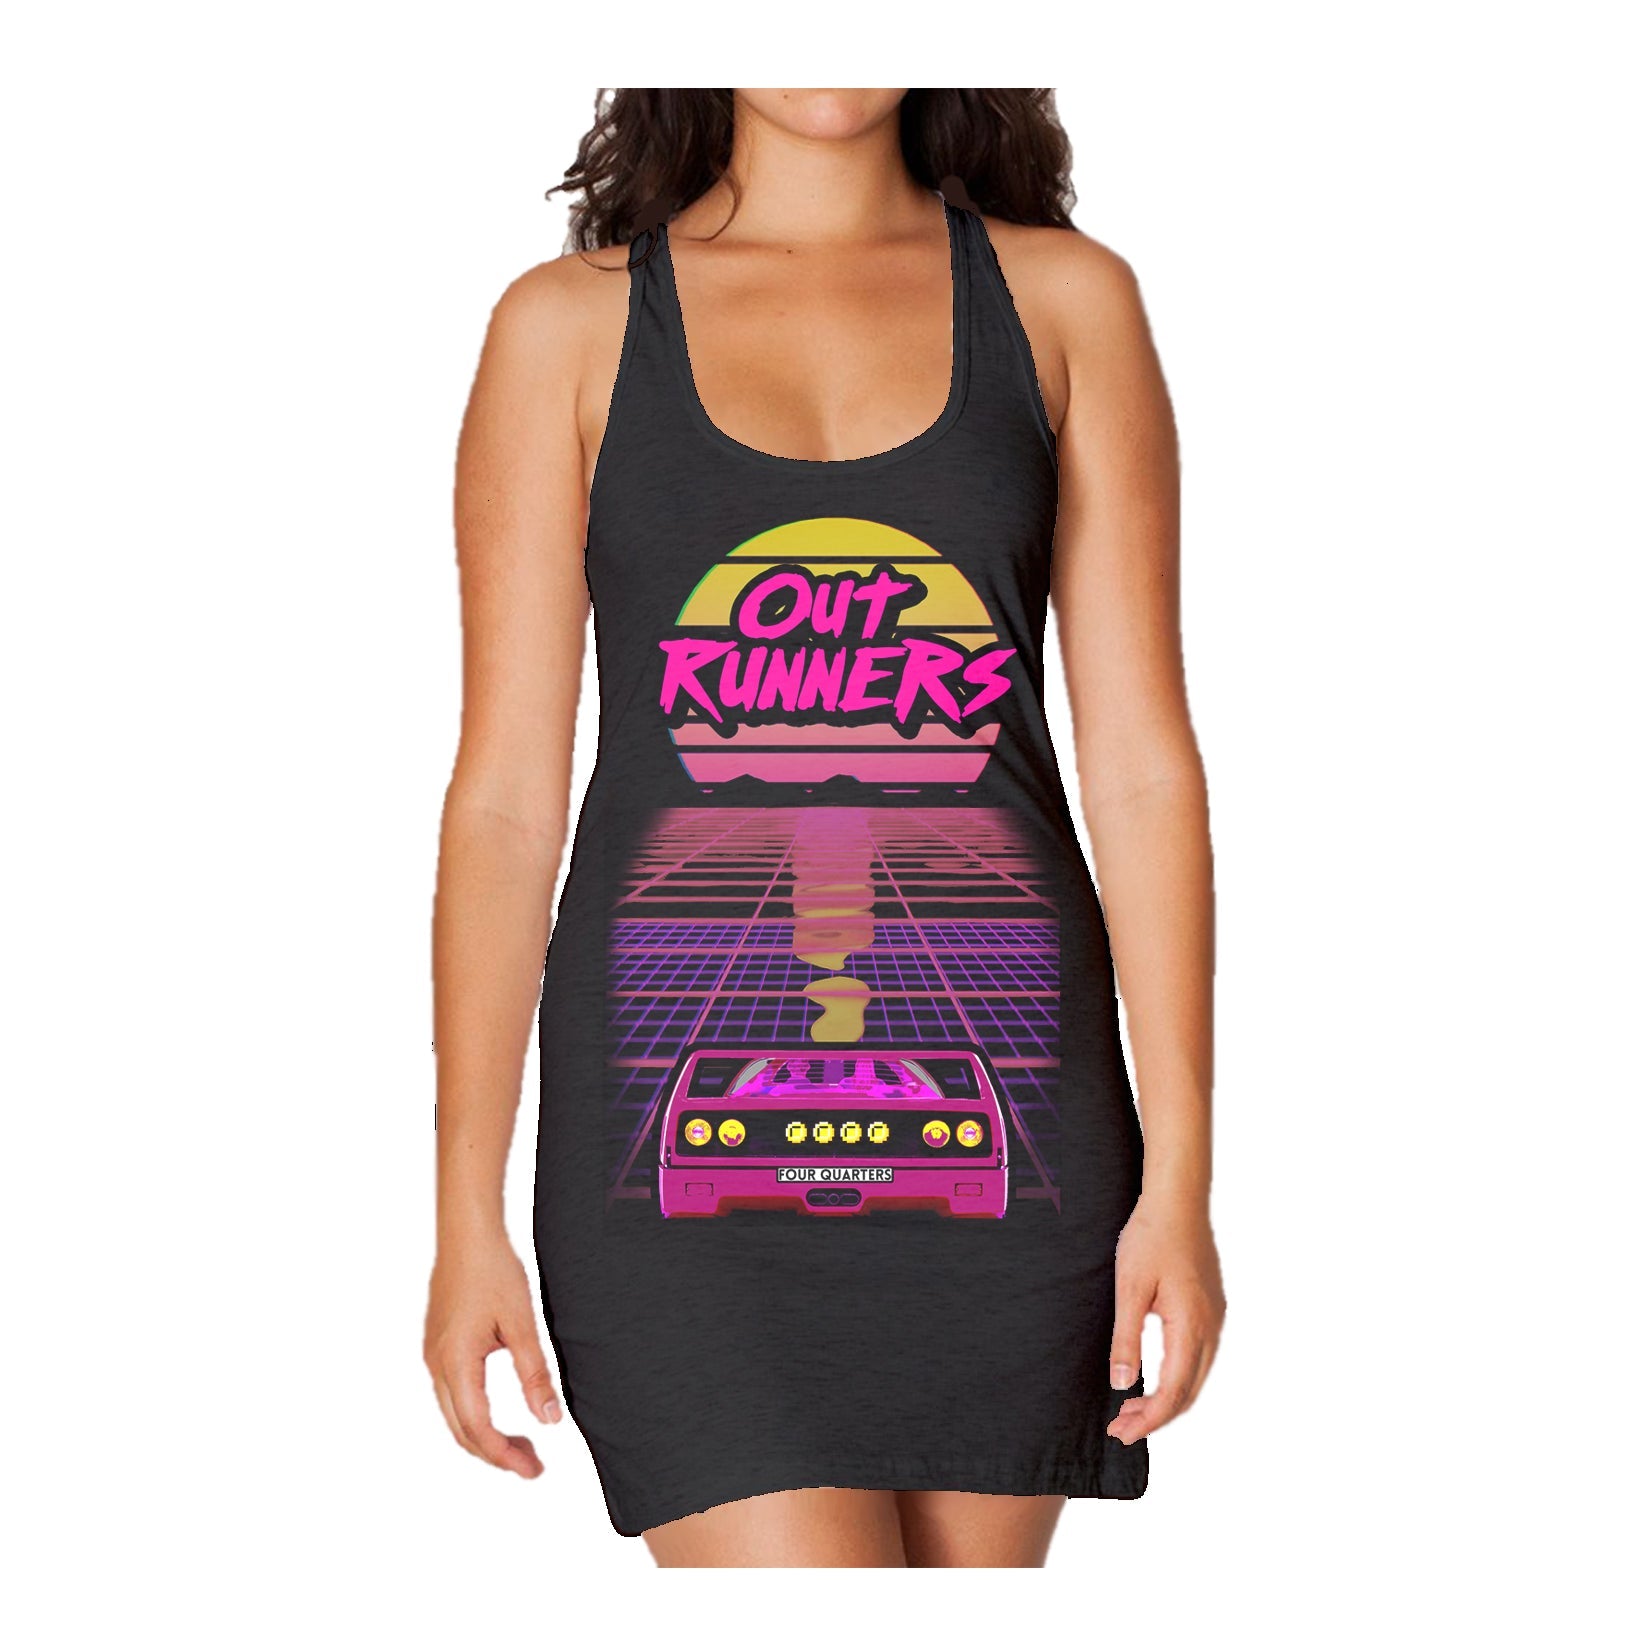 The Four Quarters Outrunners Flyer Official Women's Long Tank Dress ()